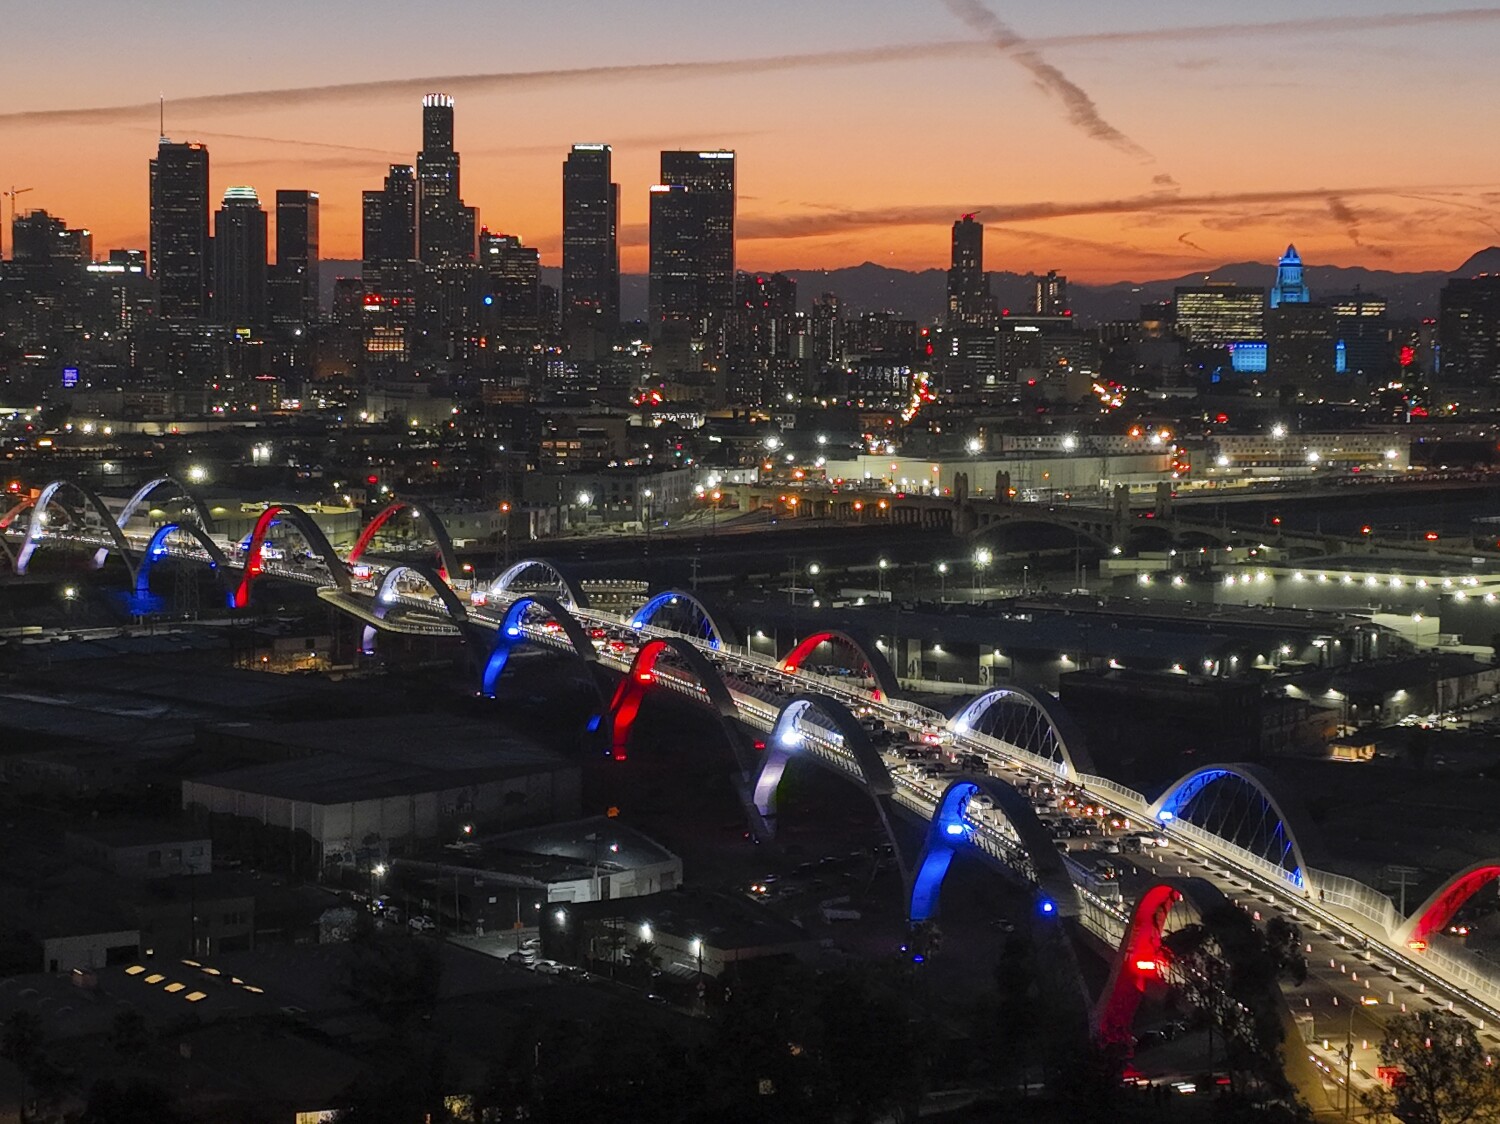 Dramatic new 6th Street Bridge opens, delivering a 'love letter' to Los Angeles